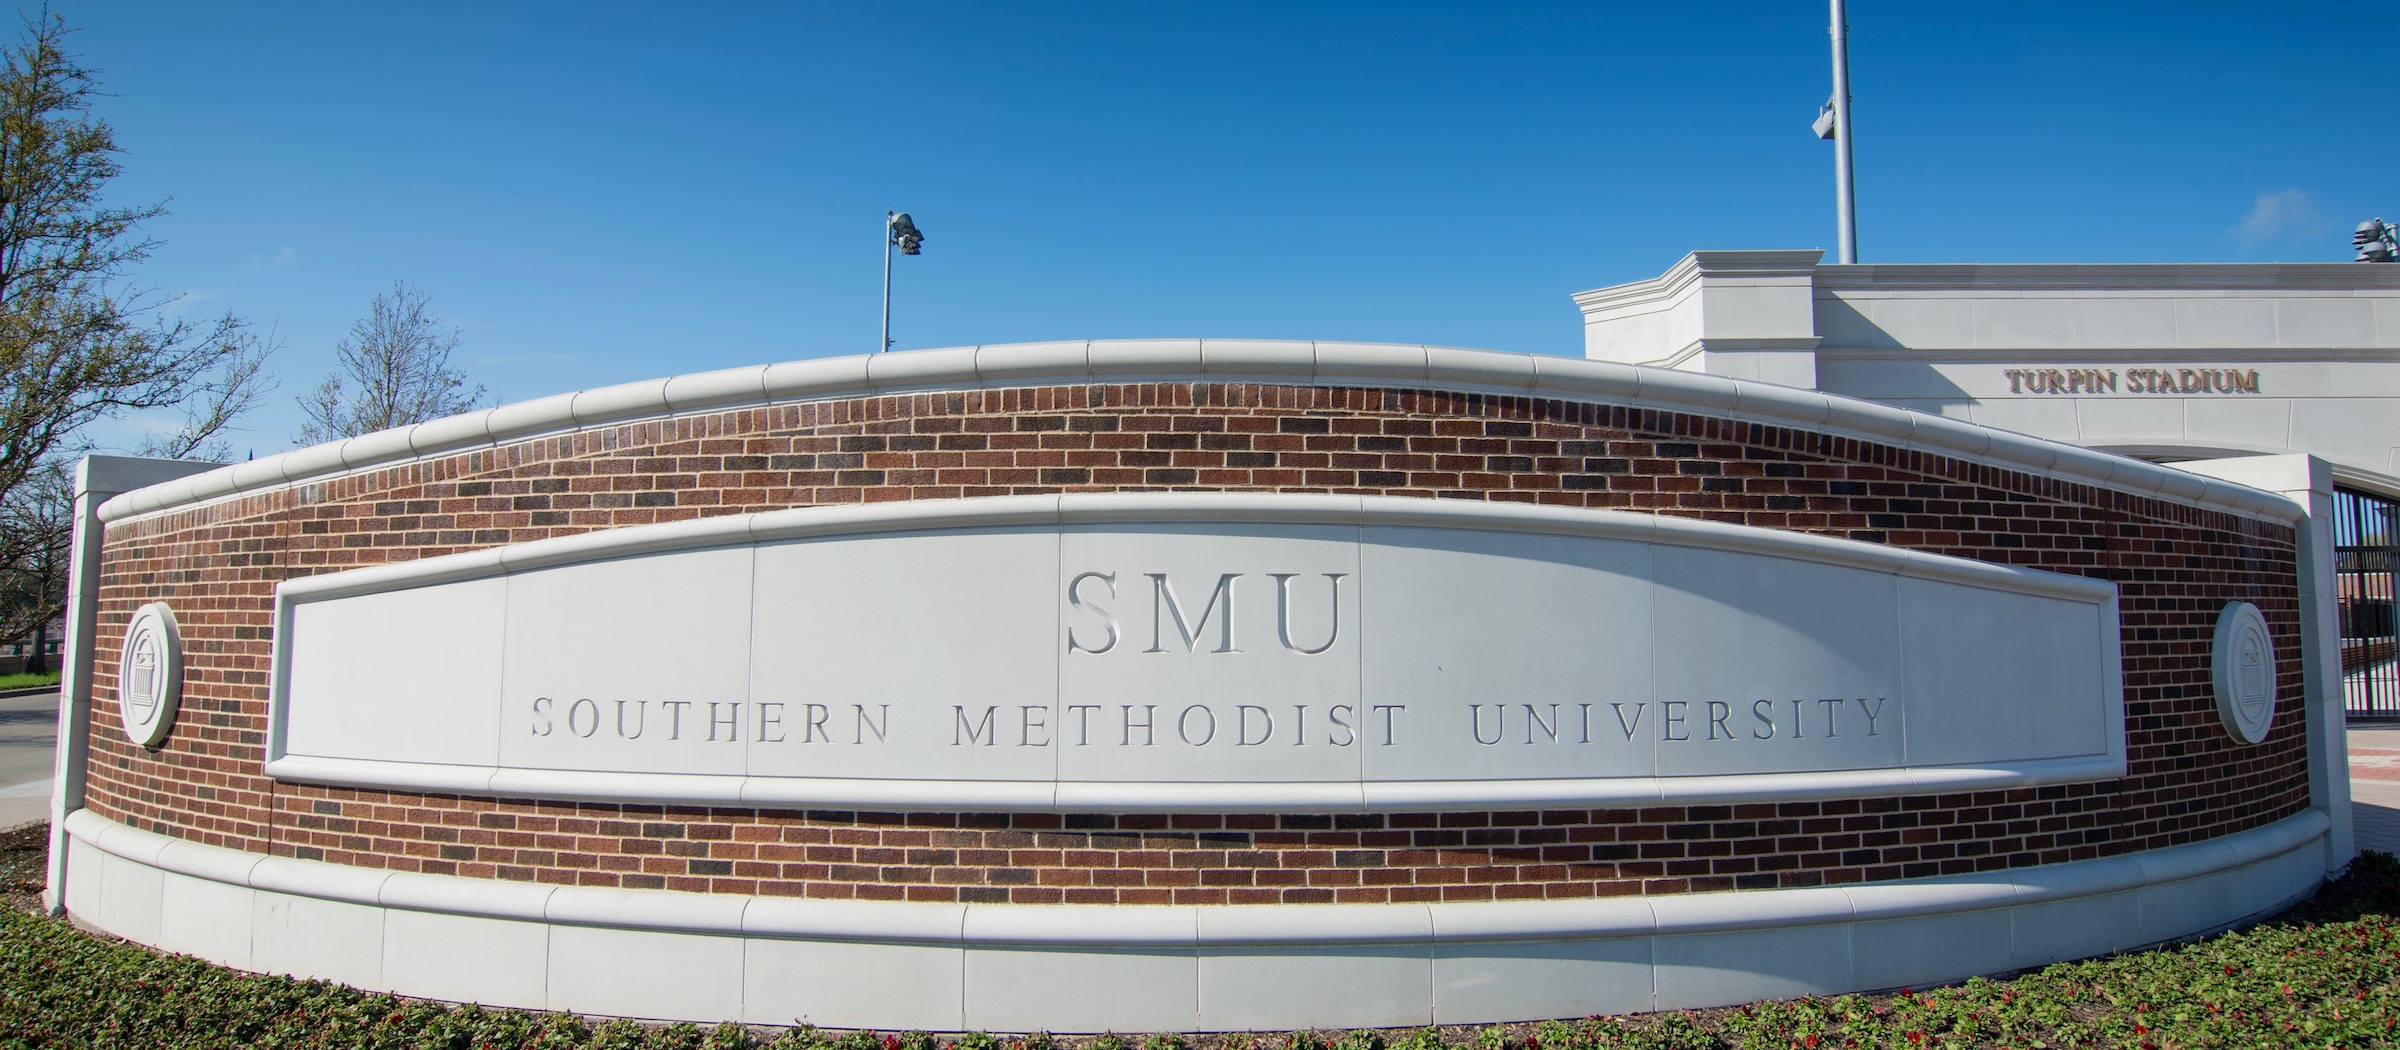 SMU Turpin Stadium - Custom Stone Manufacturing for Wall Coping, Signage, Cladding, Cornices and Banding Design